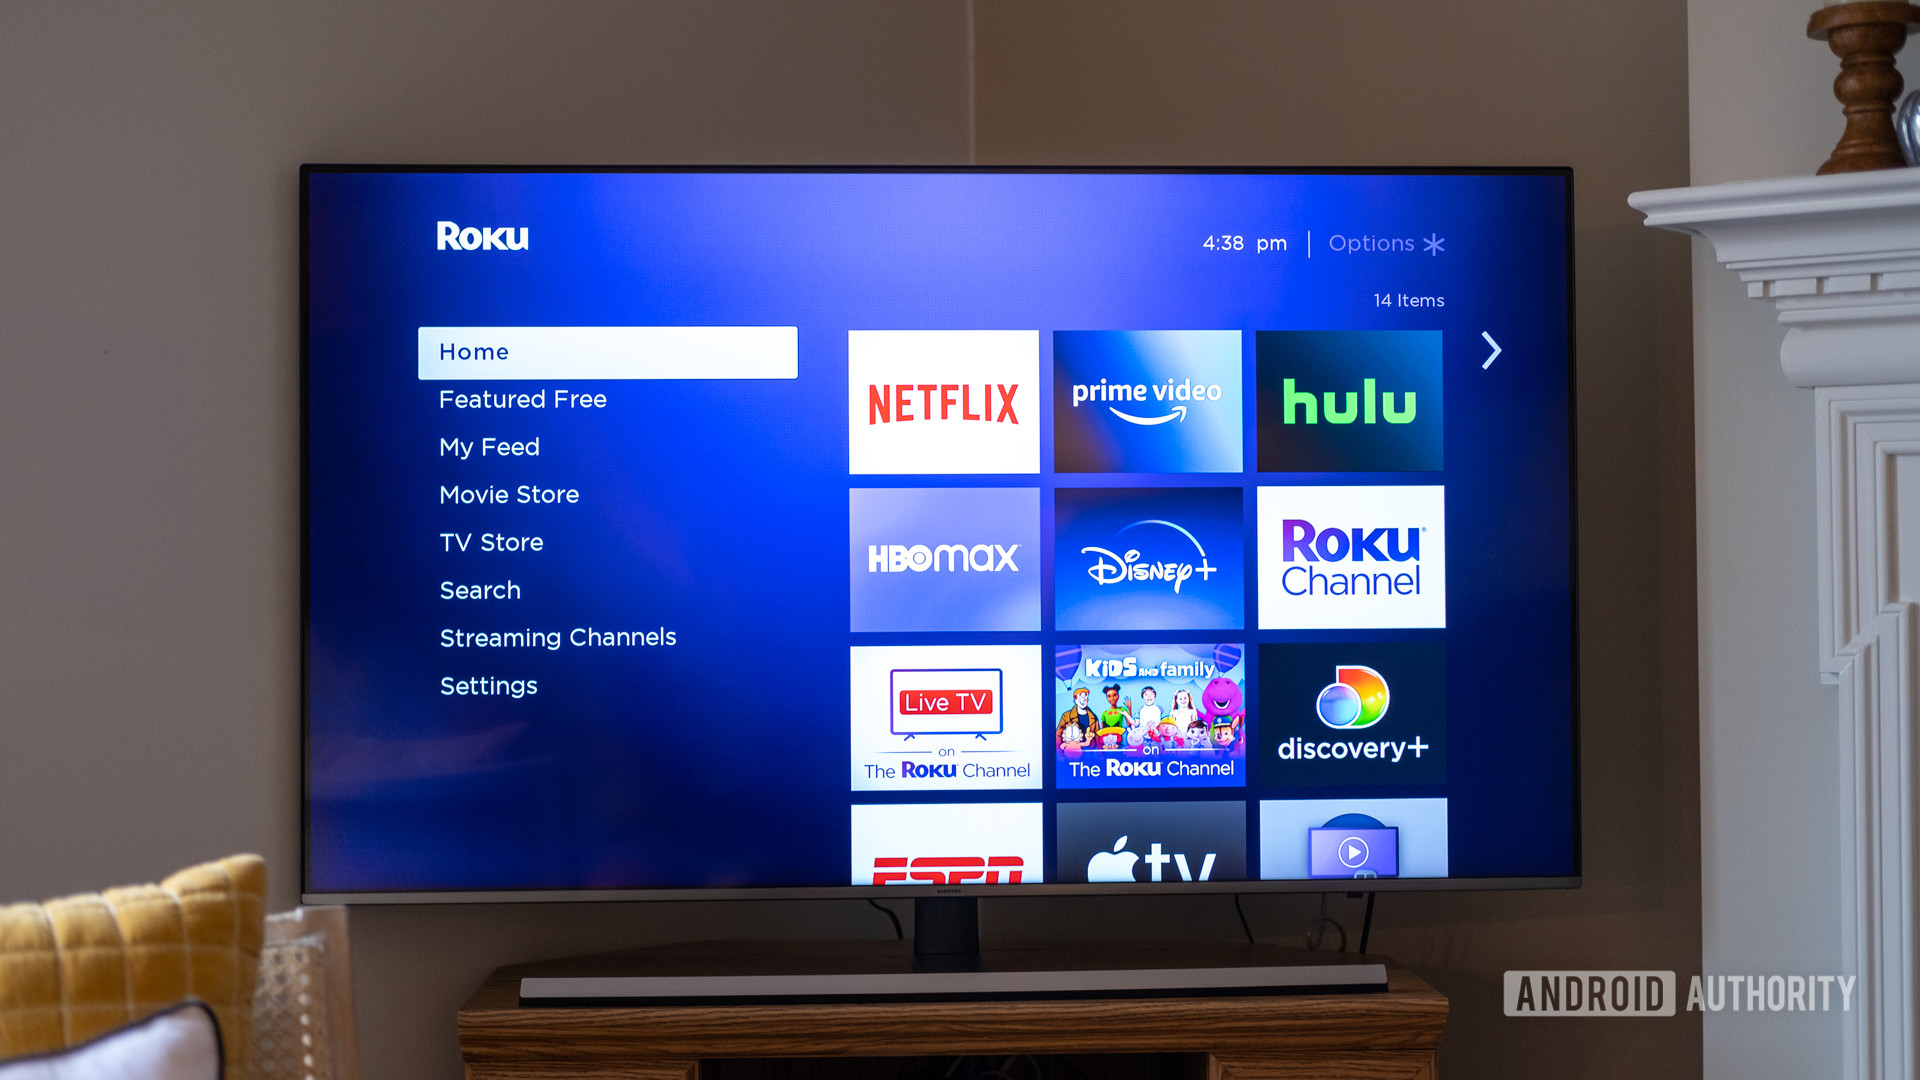 Roku home interface showing different streaming apps